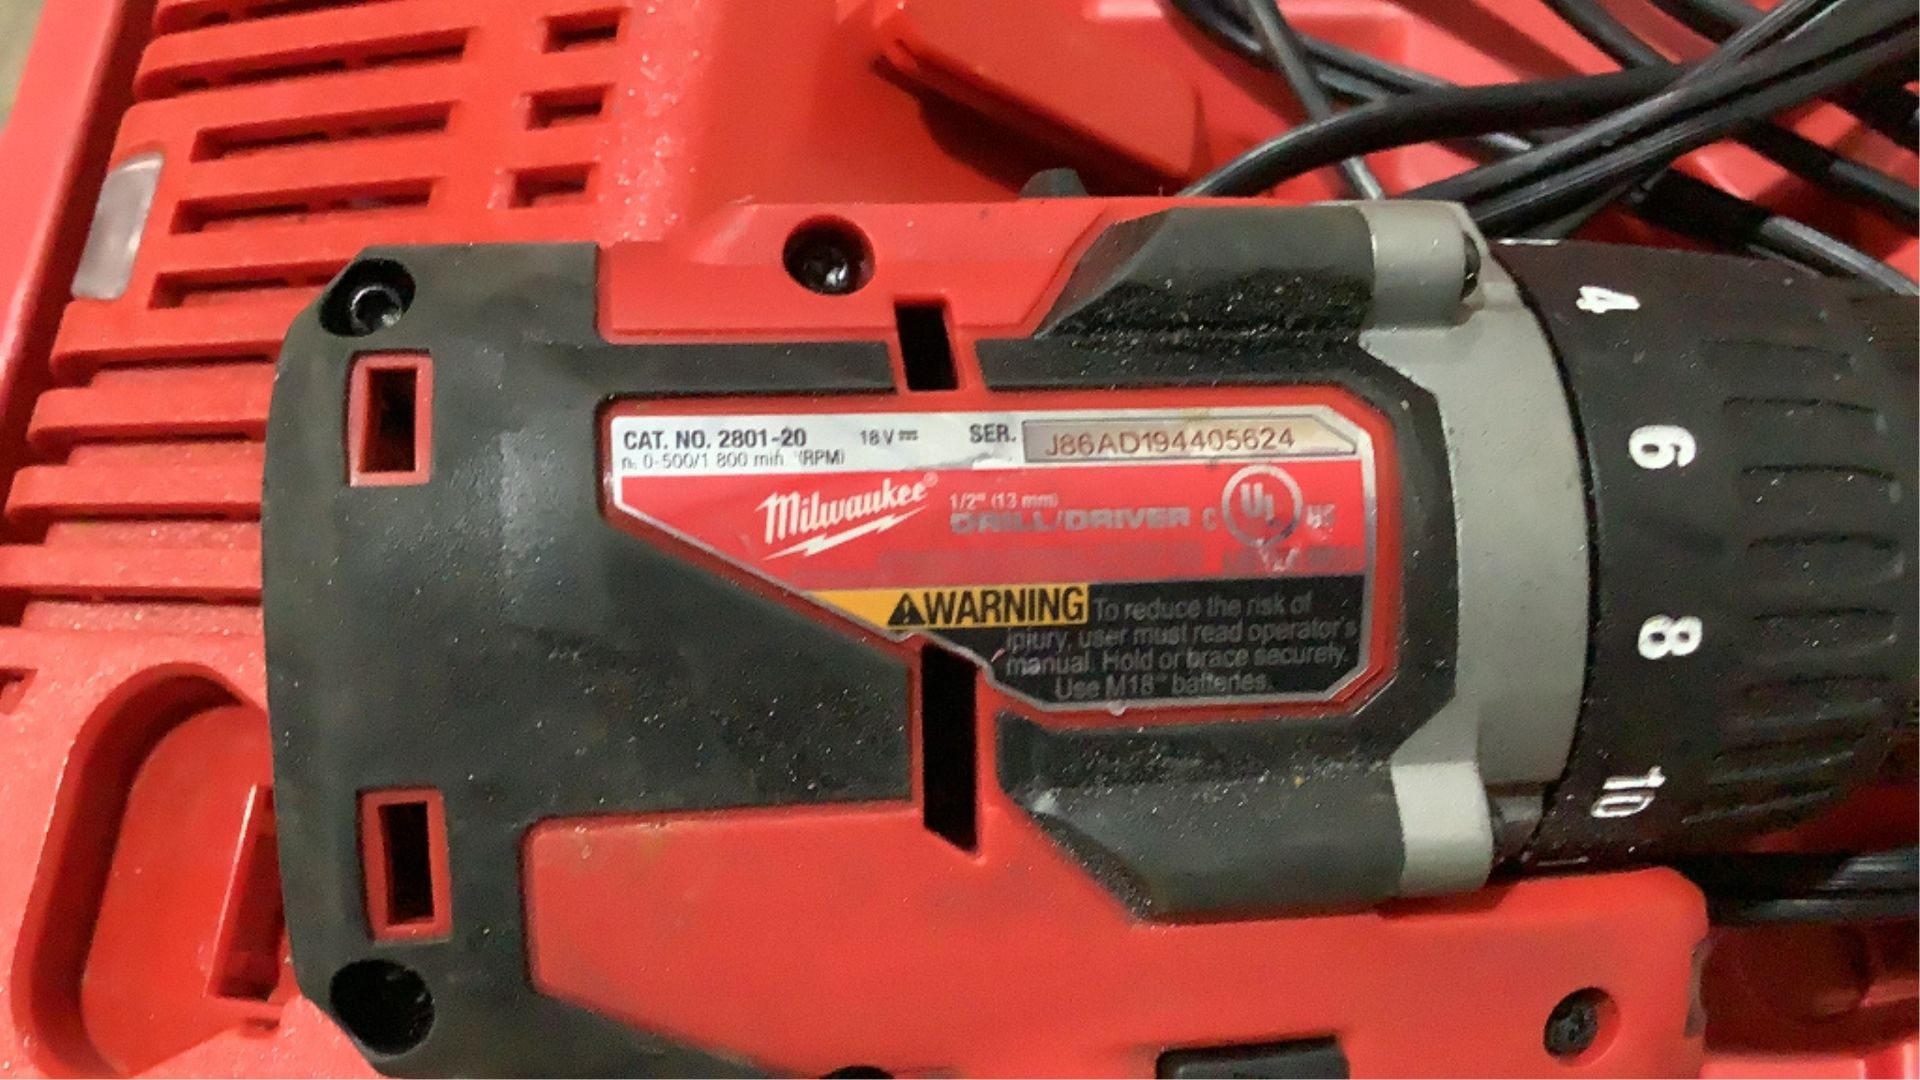 Milwaukee Cordless 1/2" Drill/Driver - Image 8 of 10